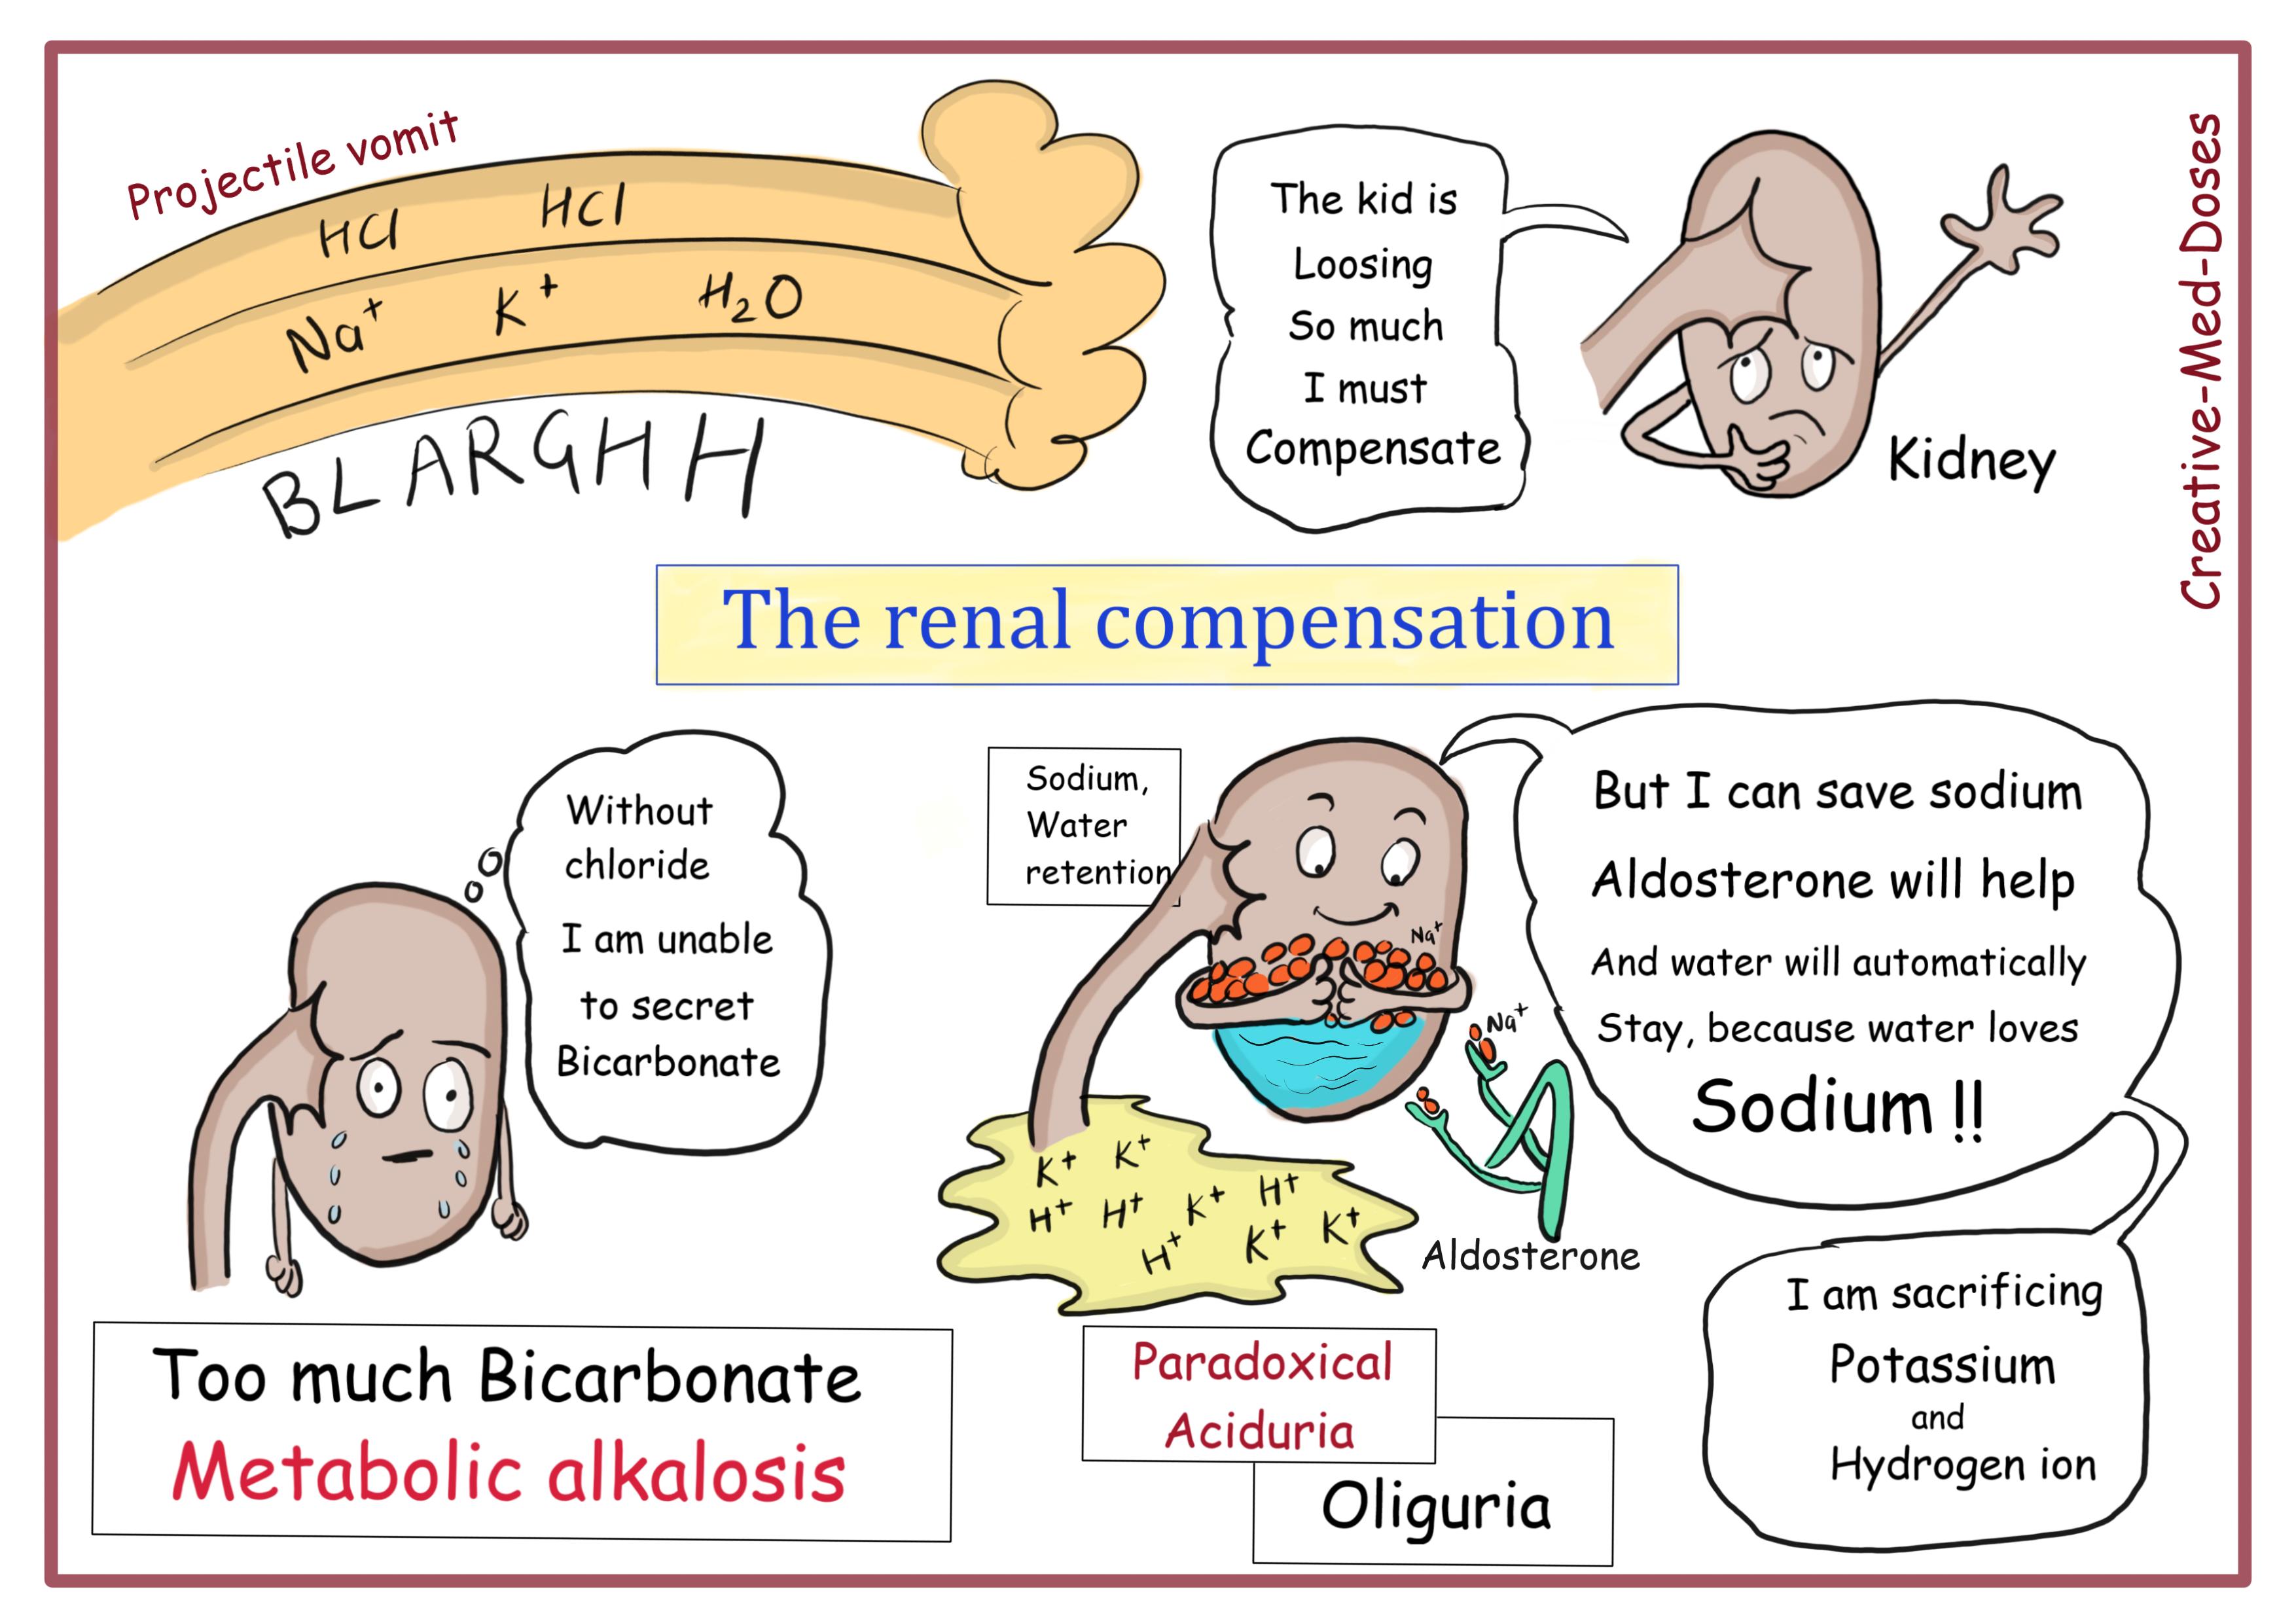 Renal compensation and metabolic alkalosis in pyloric stenosis